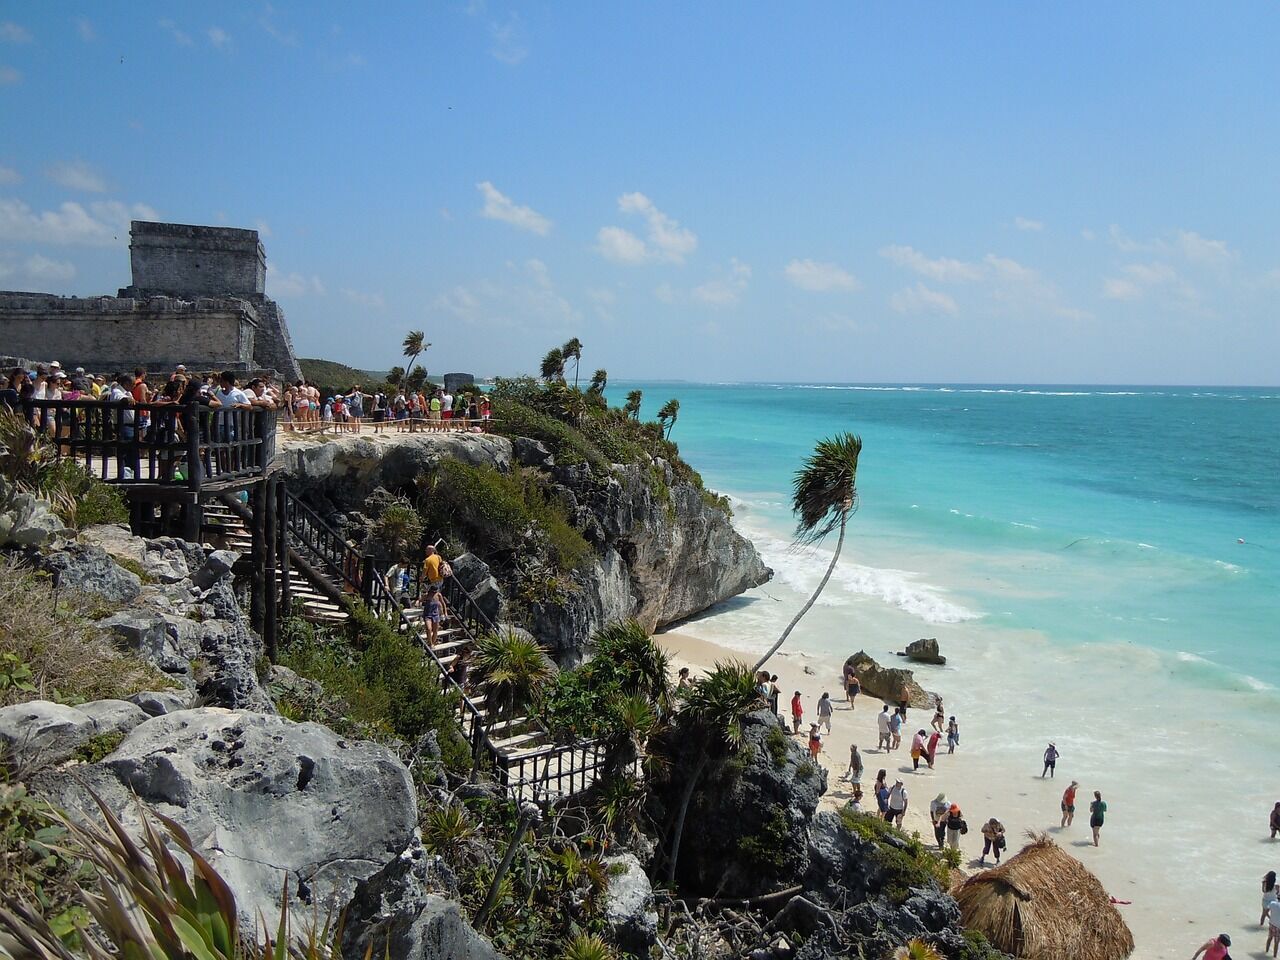 Yoga, sandy beaches and delicious food: a traveler tells why she loves Tulum